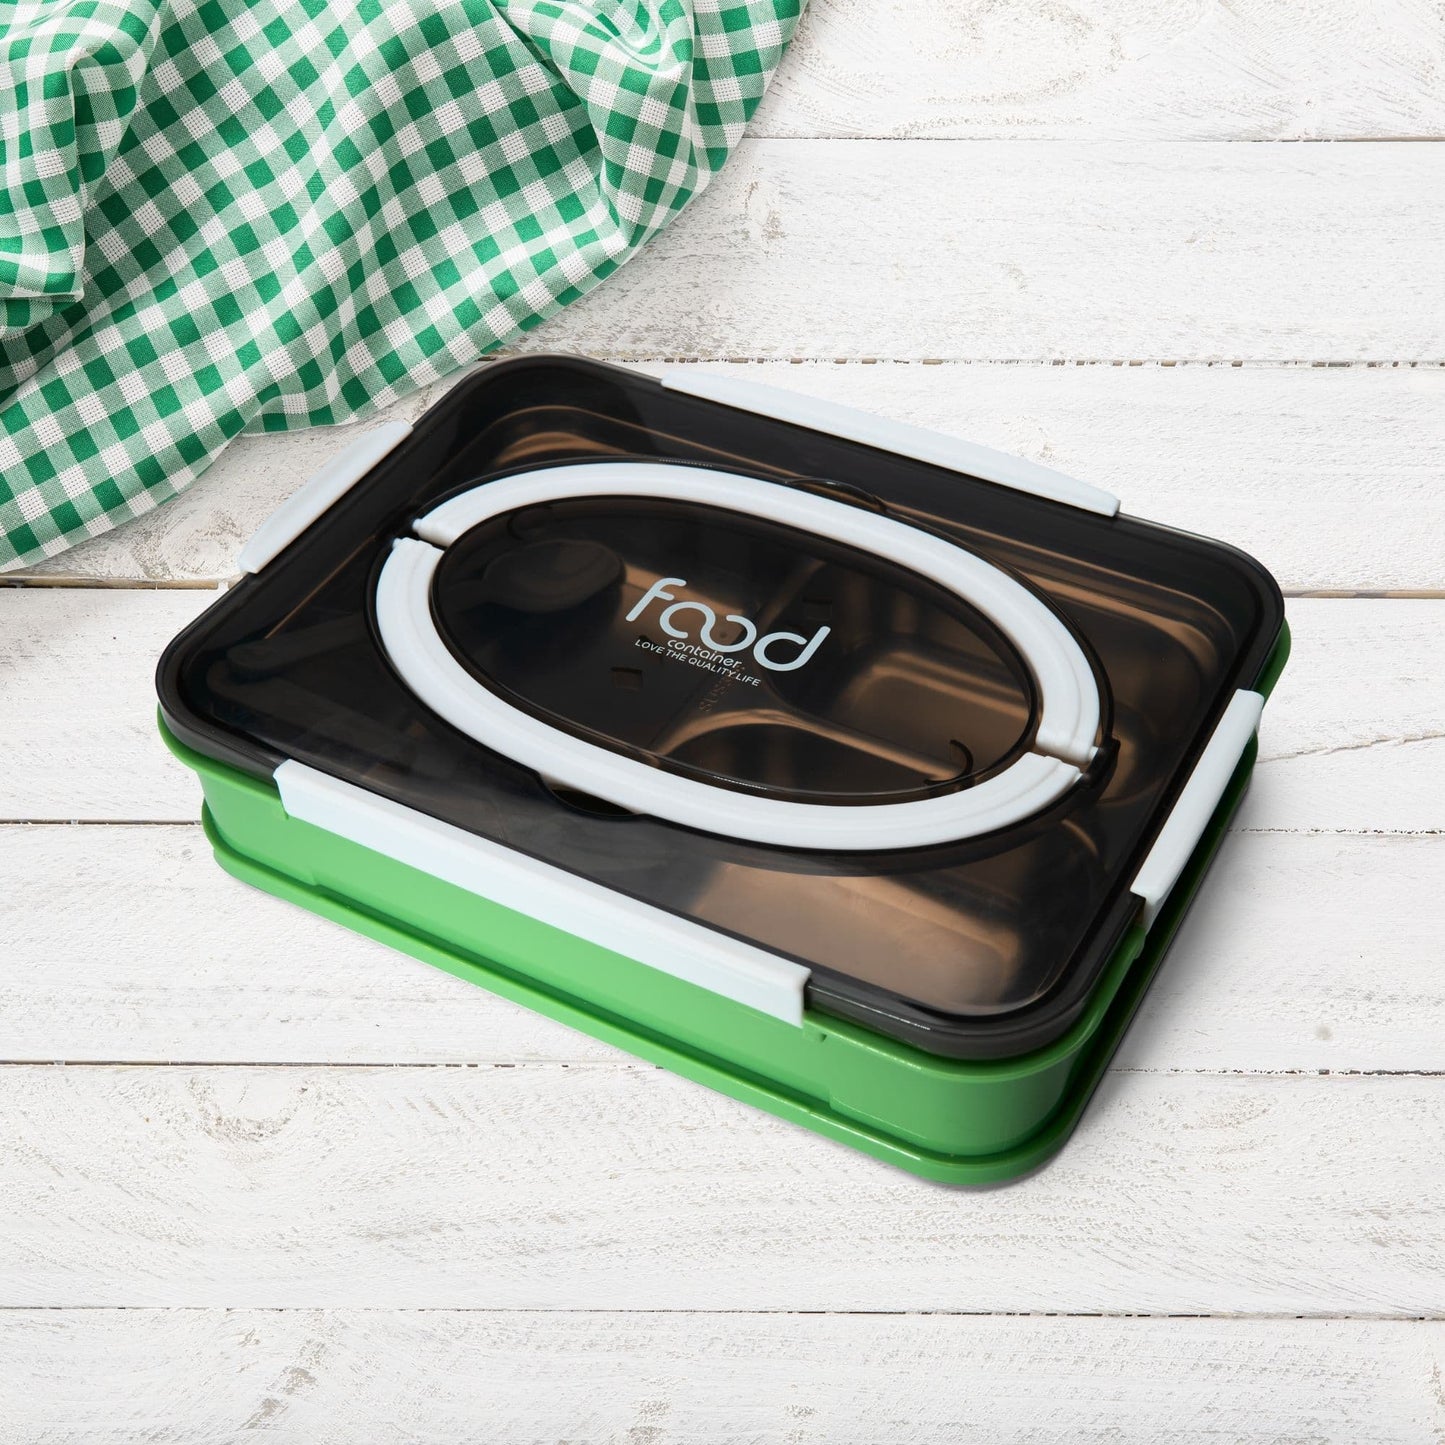 Flat Design Stainless Steel Lunch Box with Leak-Proof Lid 1000 ml